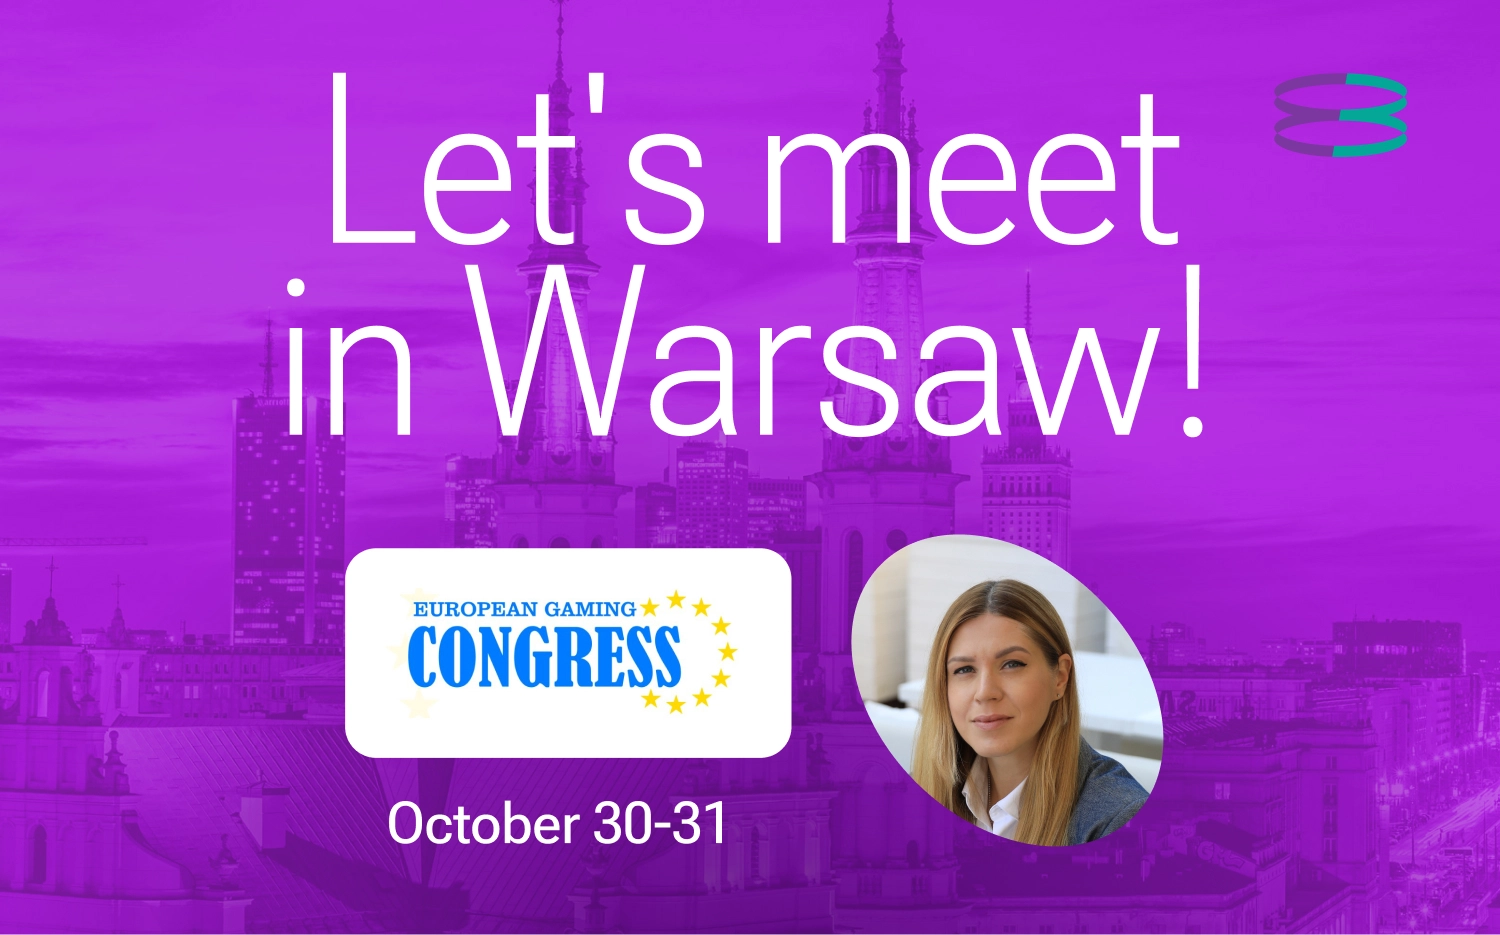 EvenBet is set to attend the European Gaming Congress! October 30-31 in Warsaw